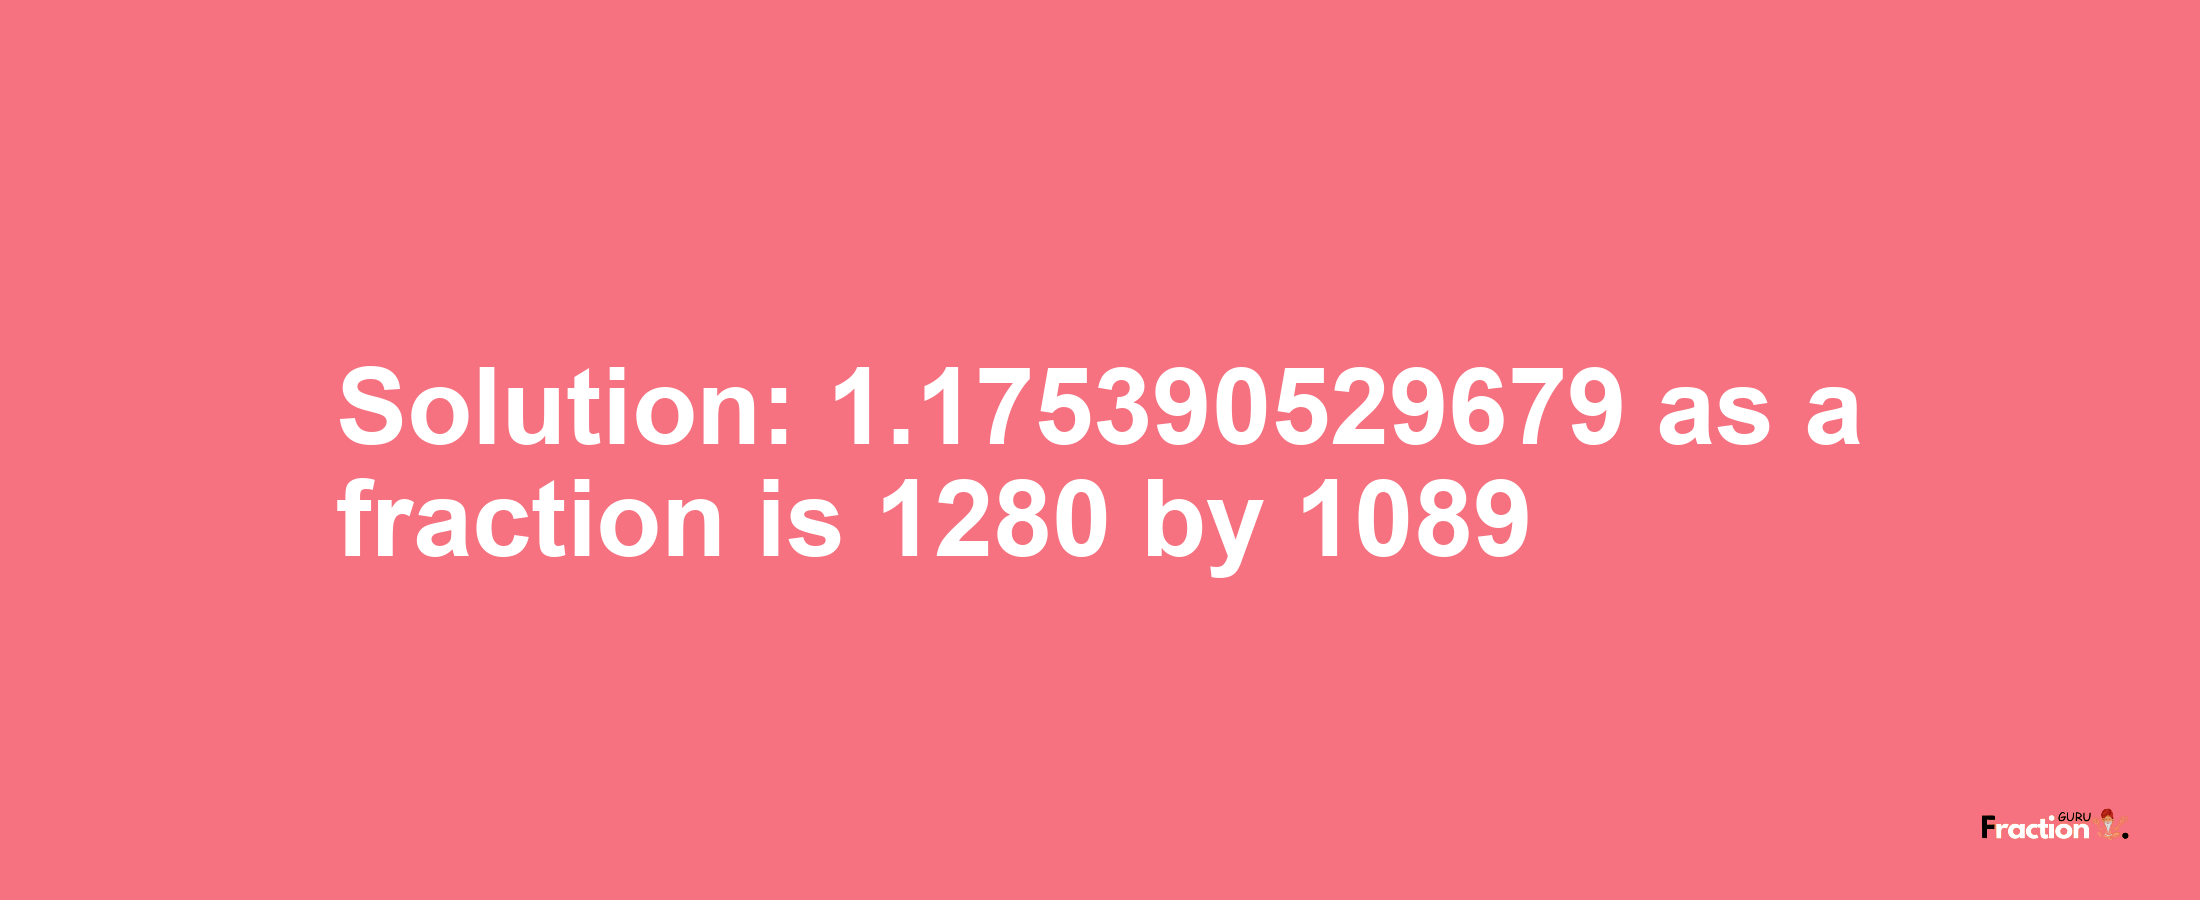 Solution:1.175390529679 as a fraction is 1280/1089